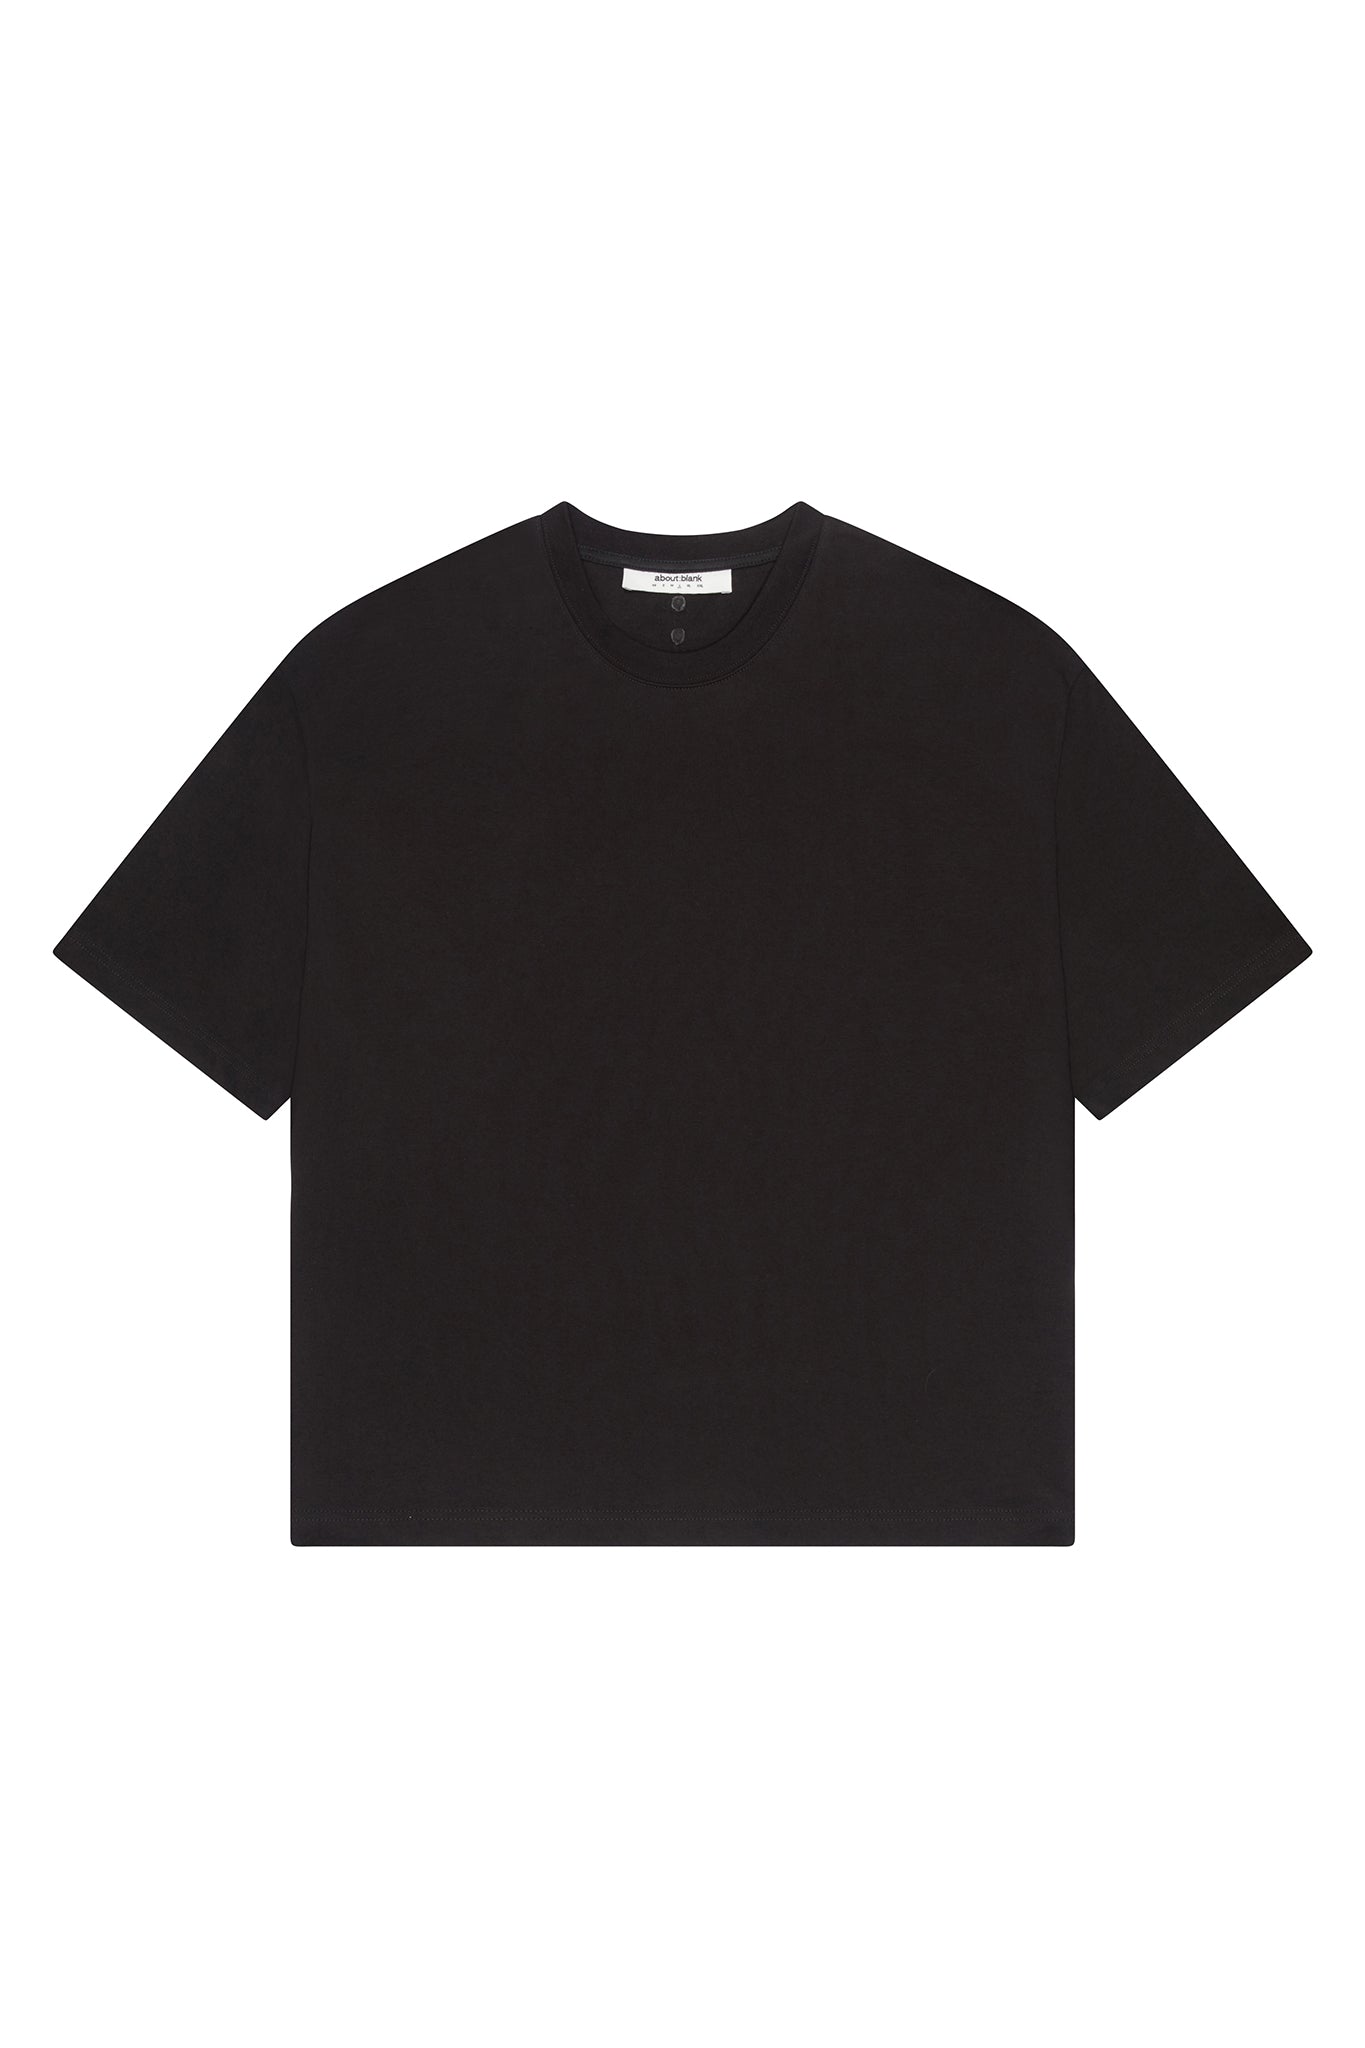 about---blank.comblank box t-shirt black